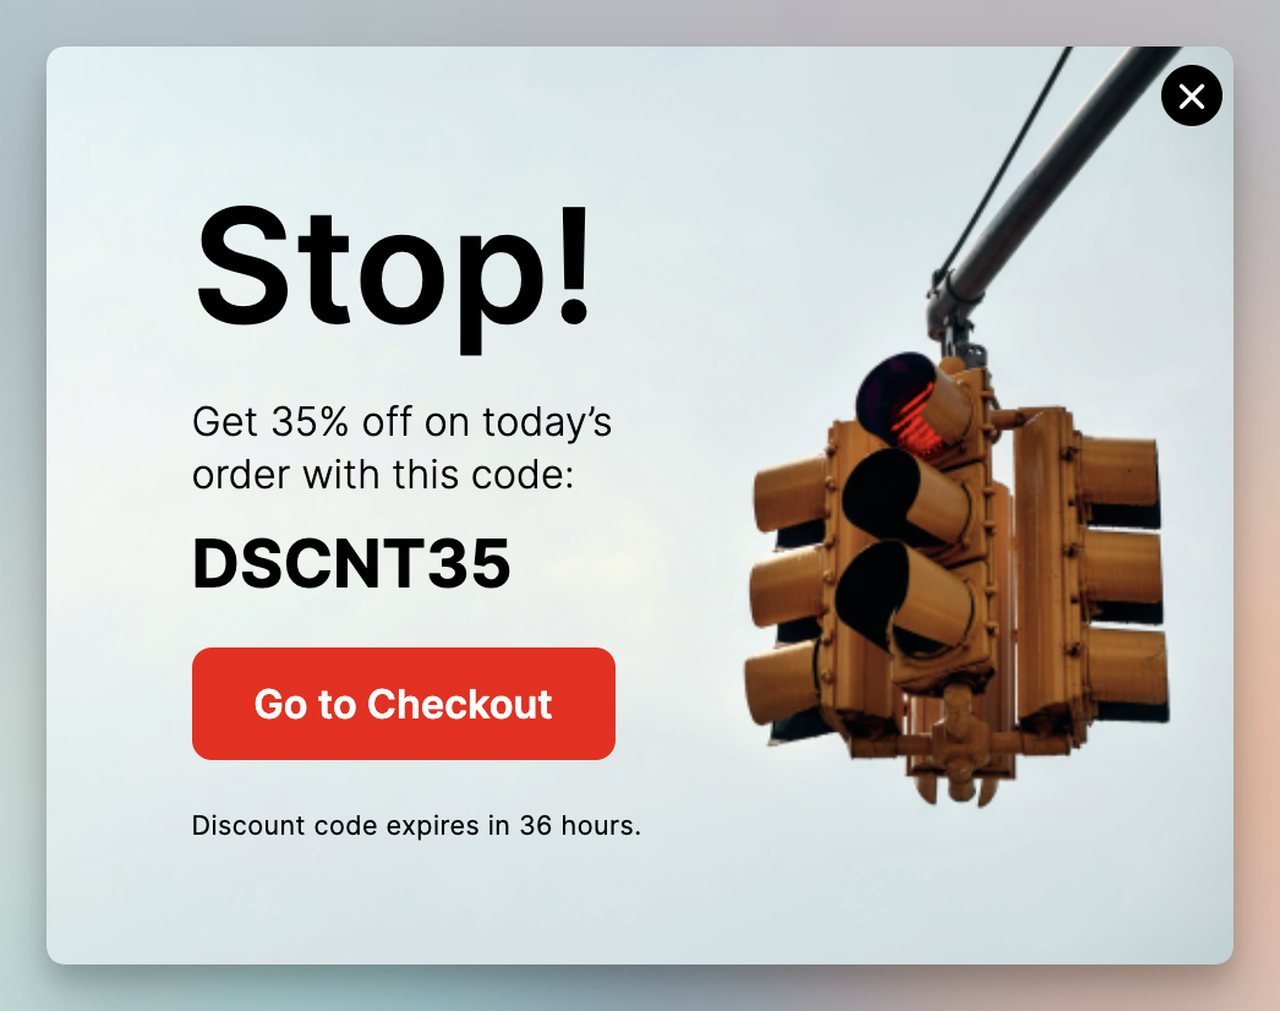 a cart abandonment popup example that says "Stop, Get 35% off on today'sorder with this code:DSCNT35" with a red CTA that says "Go to Checkout" with a picture of traffic lights